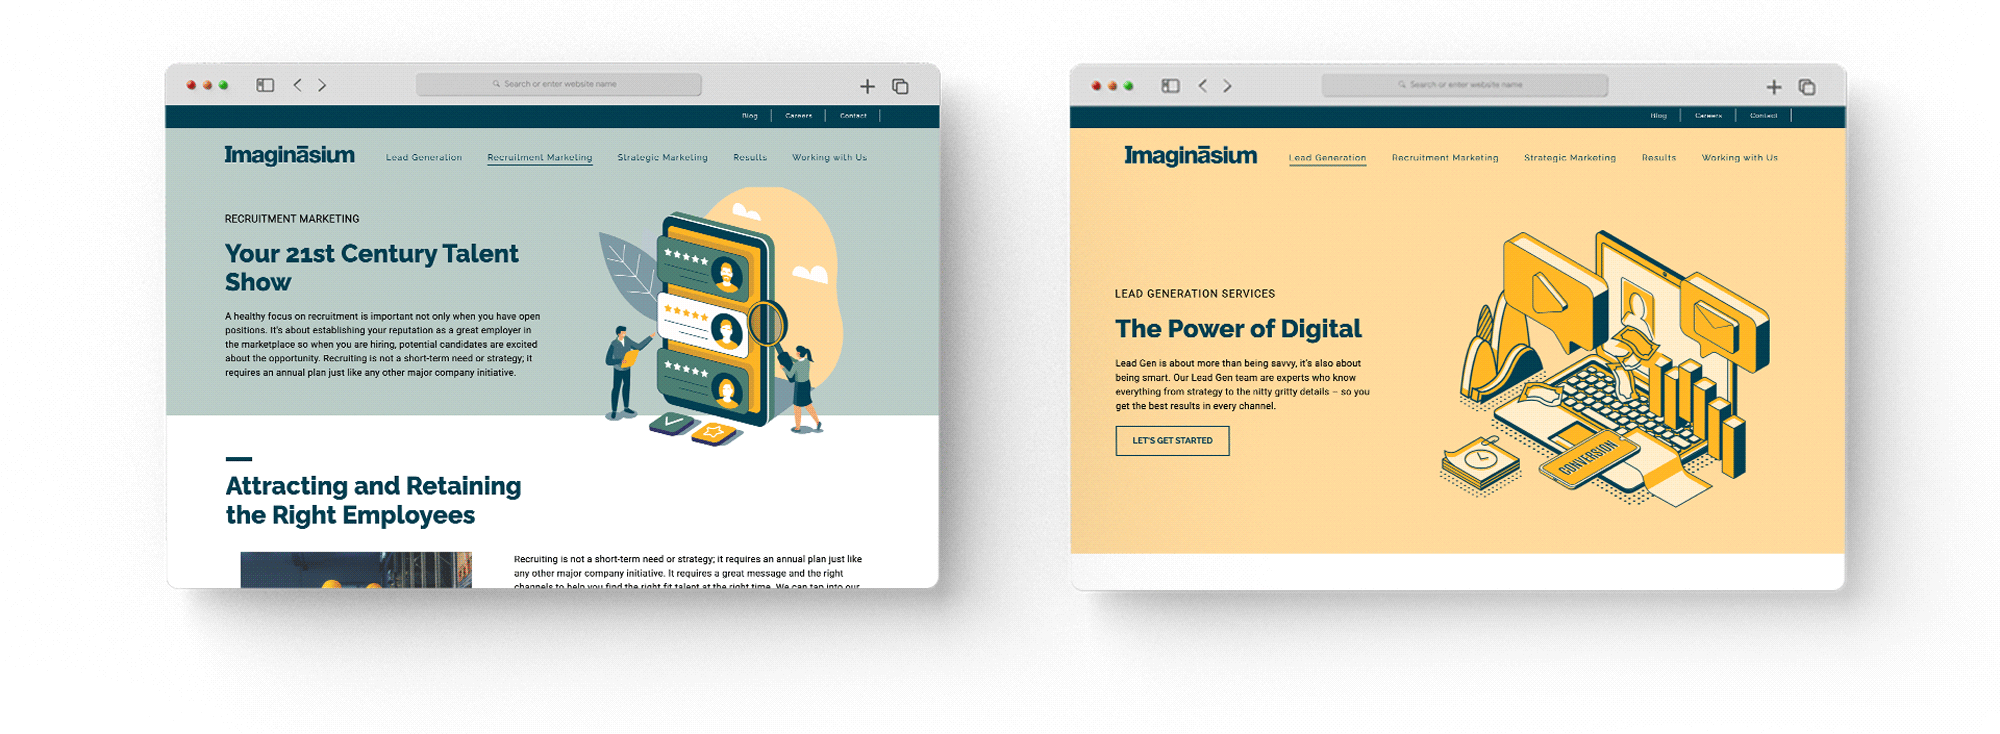 Website Development for Imaginasium by Rough Works Case Study